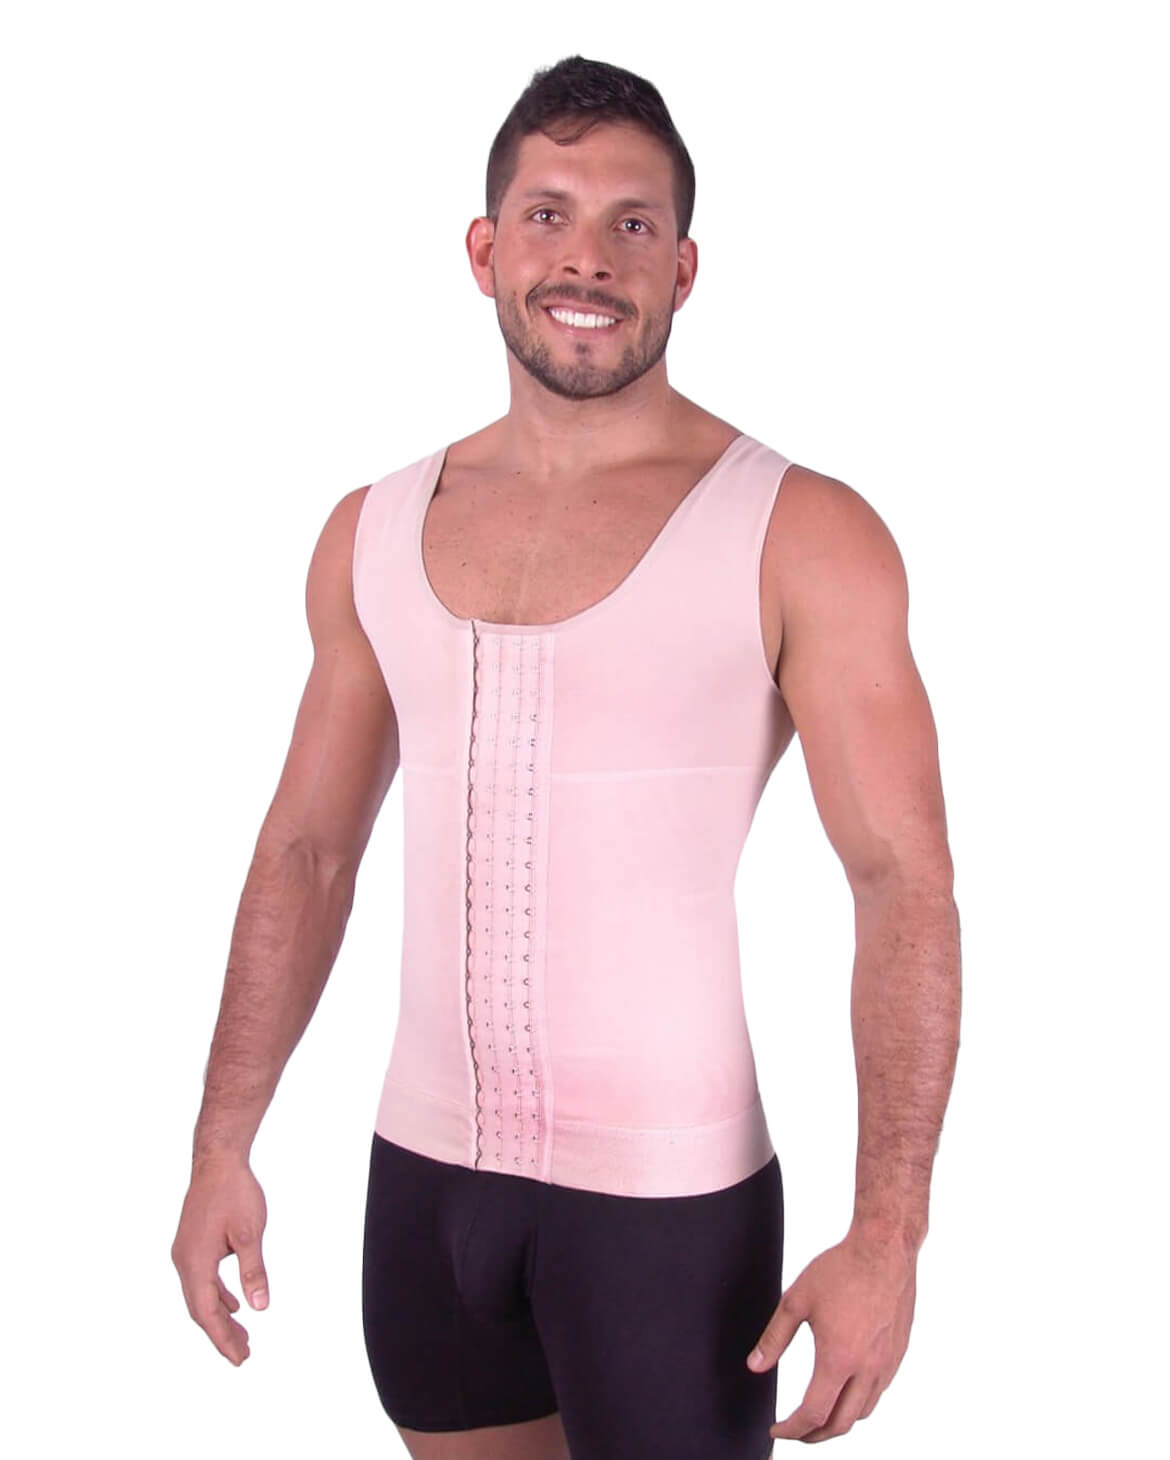 Men's Compression Vest Shapewear With Hook and Zip Fasteners, Shop Today.  Get it Tomorrow!